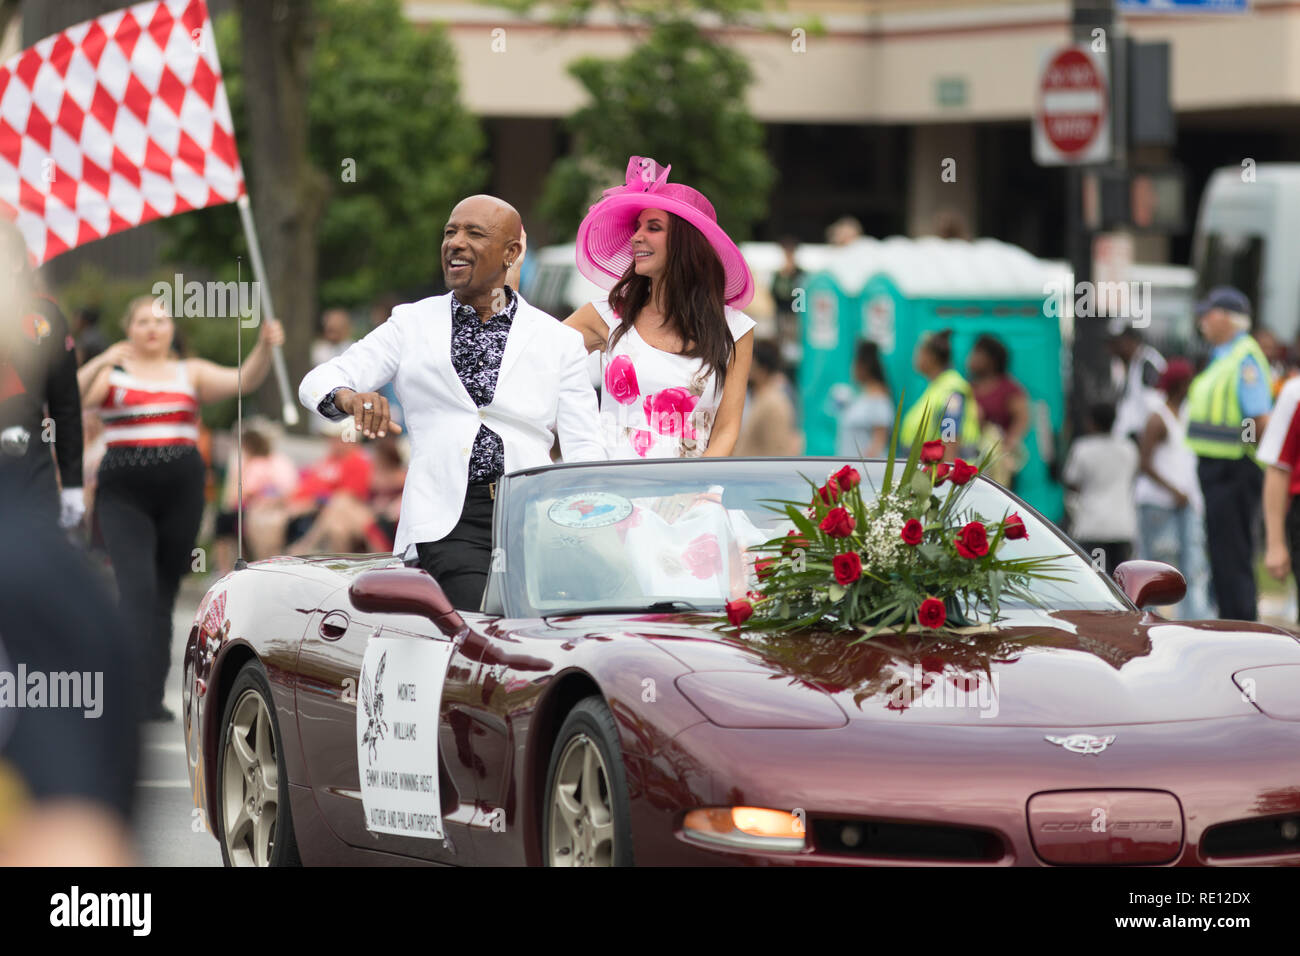 Louisville, Kentucky, USA - May 03, 2018: The Pegasus Parade, Montel Williams TV show host, riding on a car going down W Broadway Stock Photo